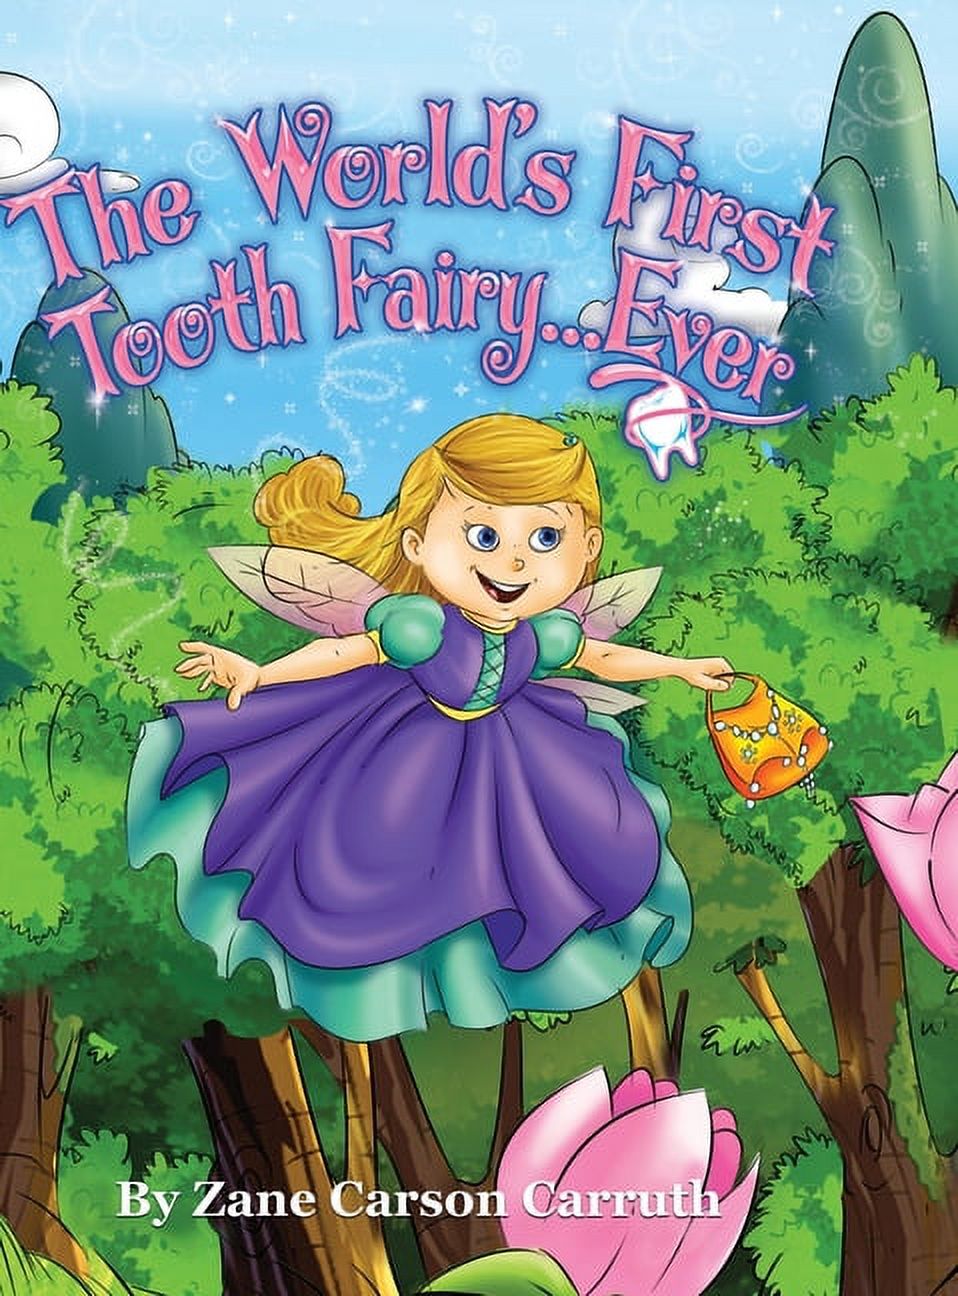 The World&apos;s First Tooth Fairy... Ever, (Hardcover) - image 1 of 1